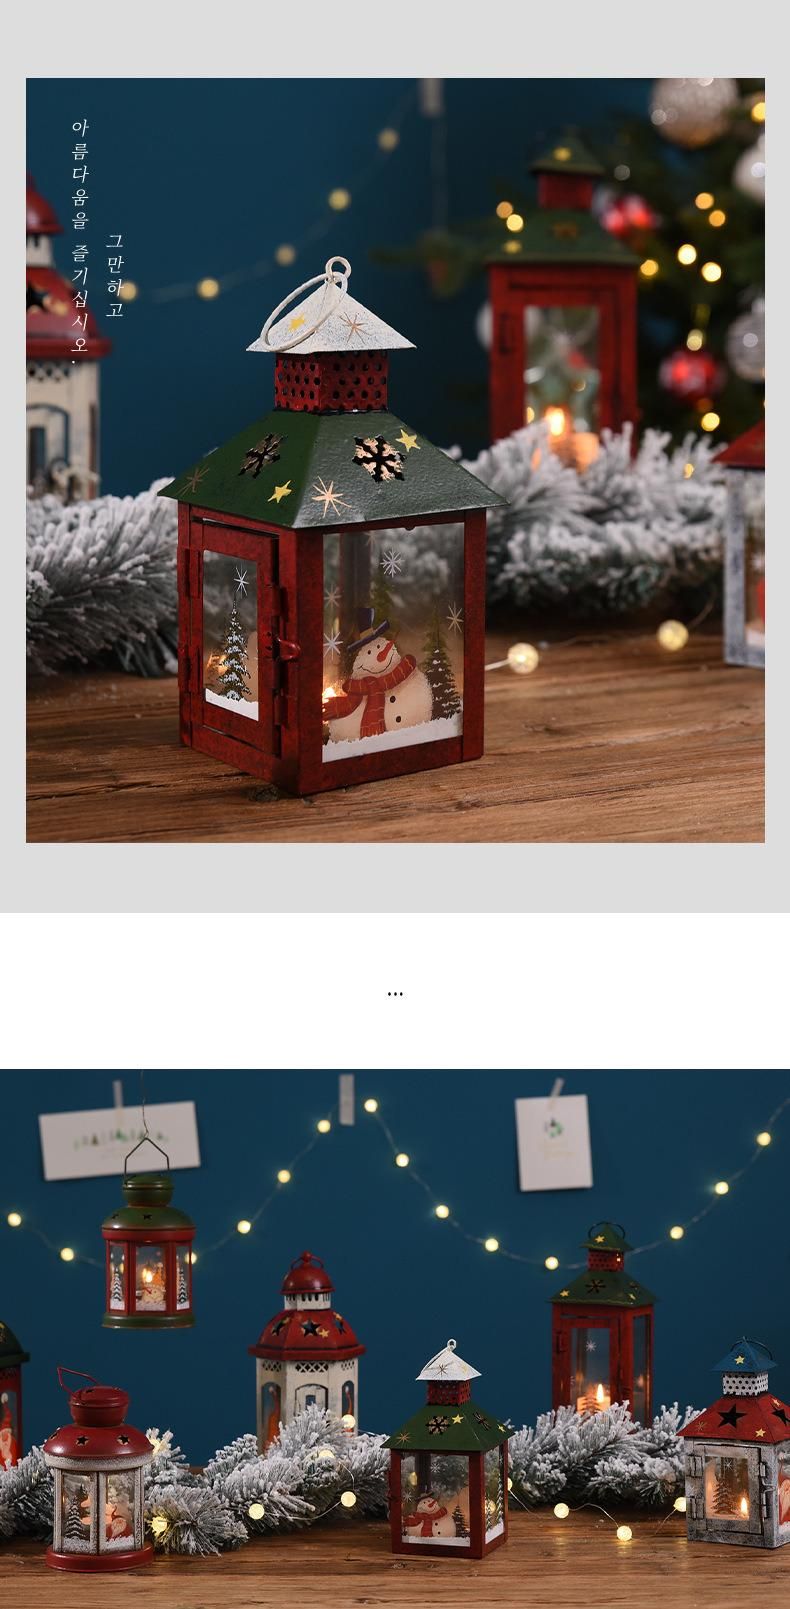 2021 Hot Sale Retro Lanterns Wrought Iron Glass Ornaments Christmas Candle Holder